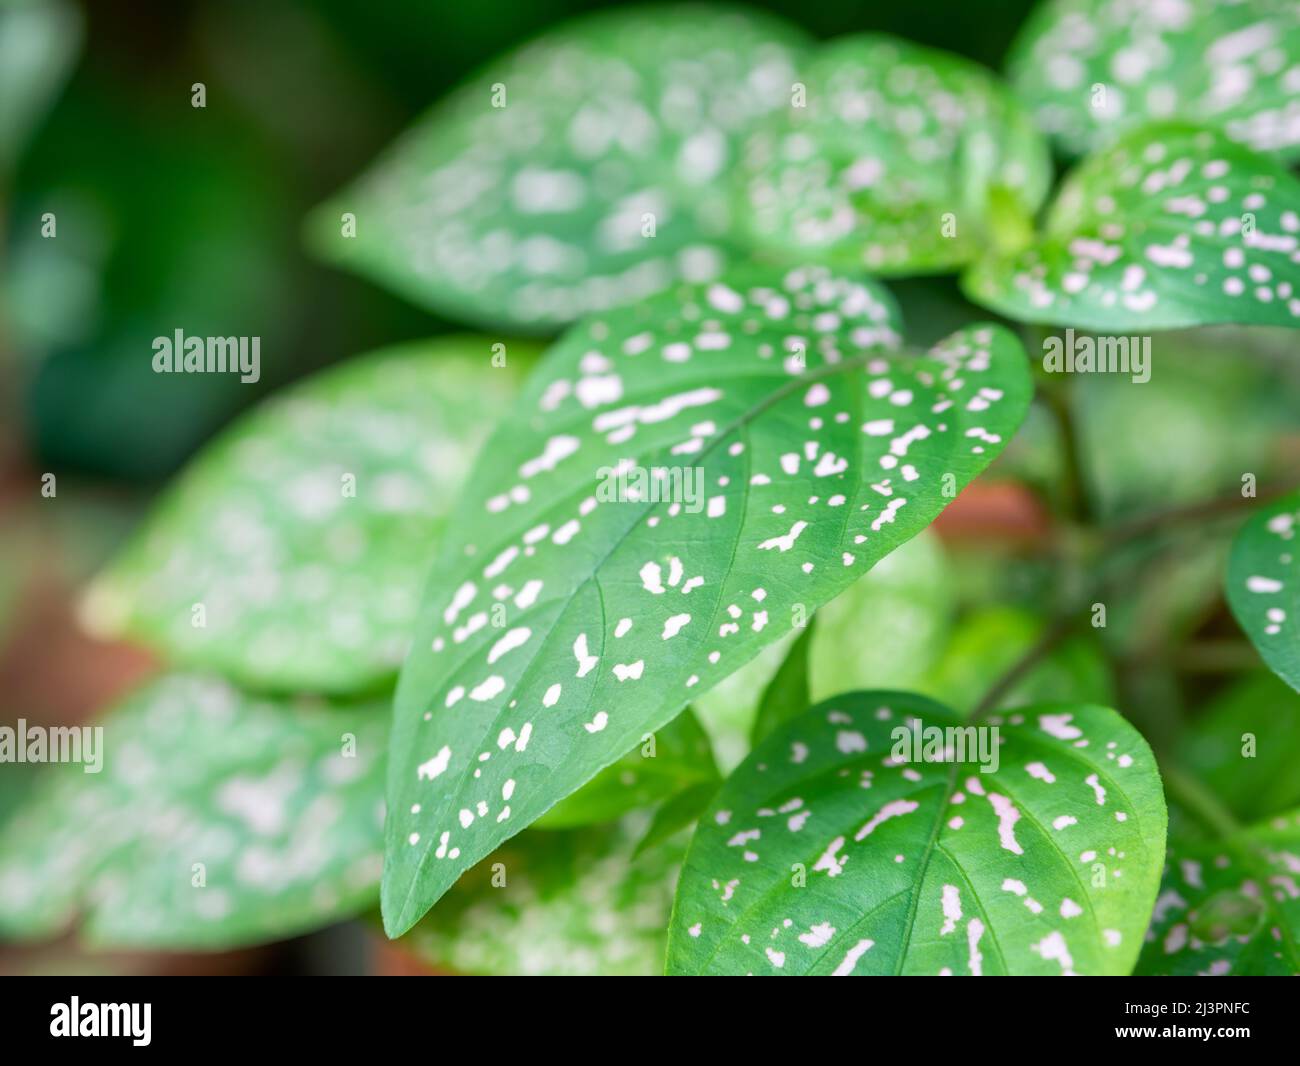 Detail with Hypoestes phyllostachya, the polka dot plant ornamental plant. Green leaves with white spots Stock Photo